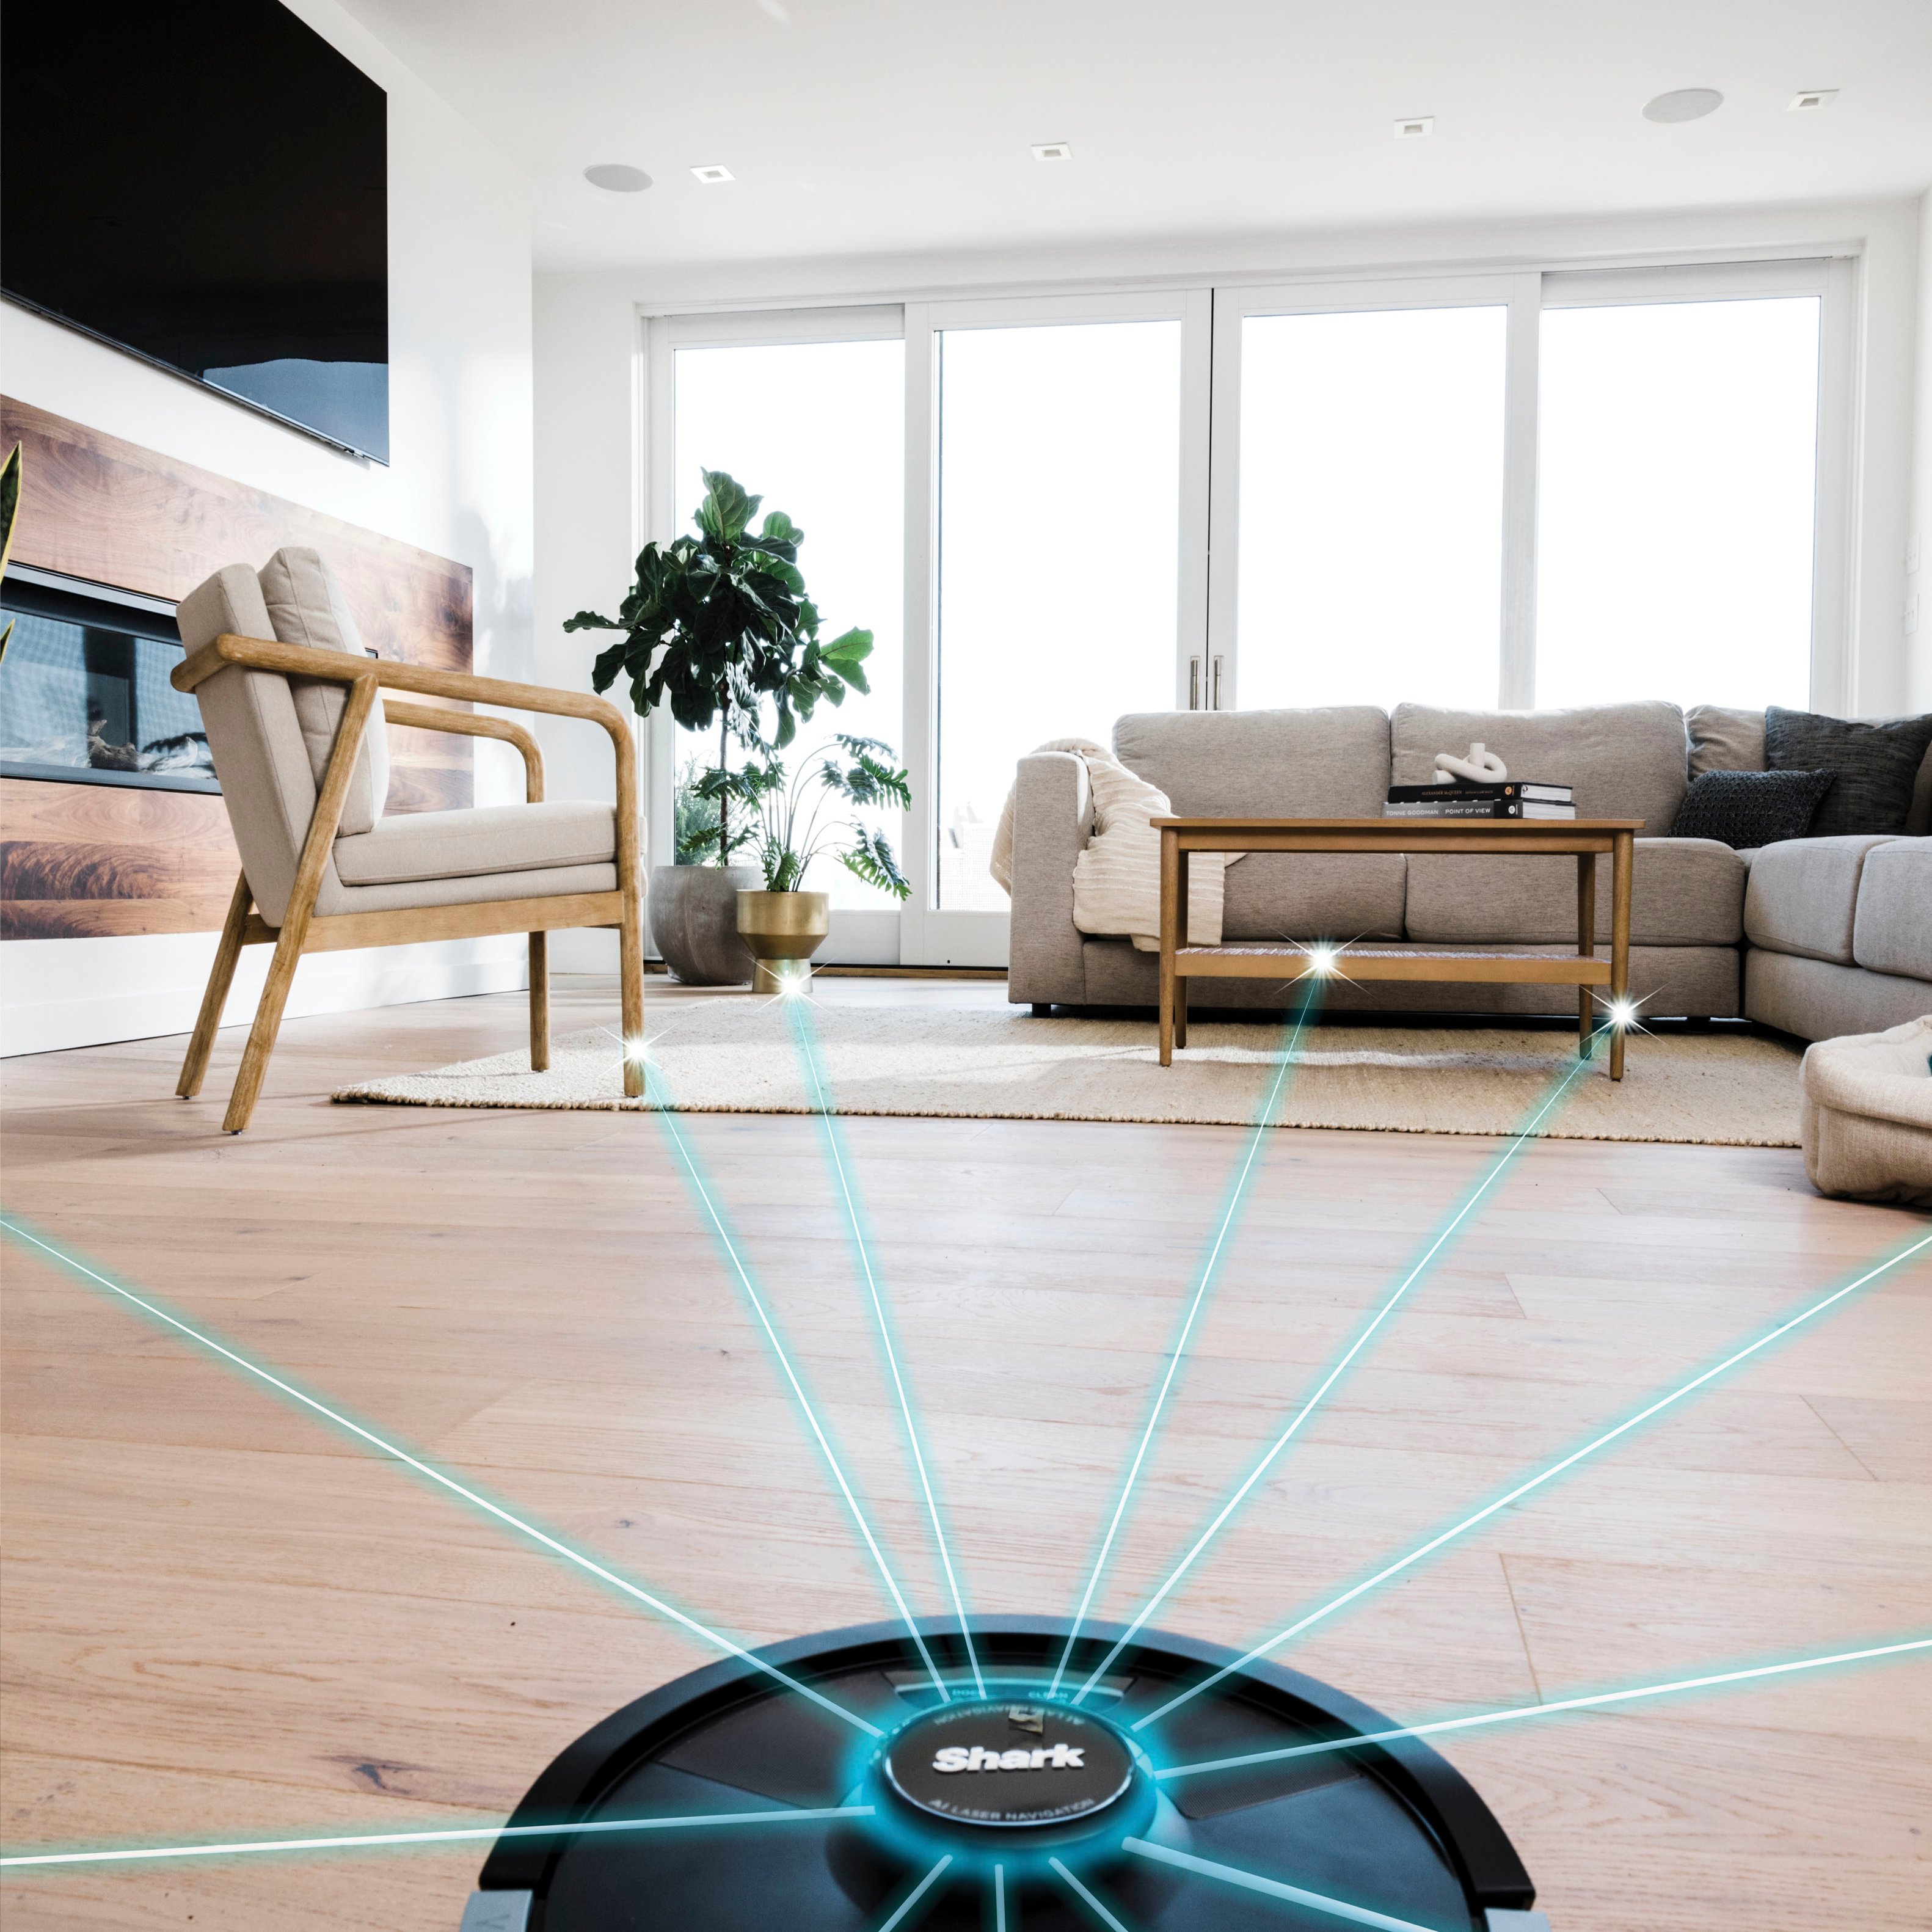 Shark AI Ultra 2-in-1 Matrix Robot WiFi Mop RV2620WD Clean, Mopping, Sonic Best with & Black Home Vacuum Connected Buy Mapping, 